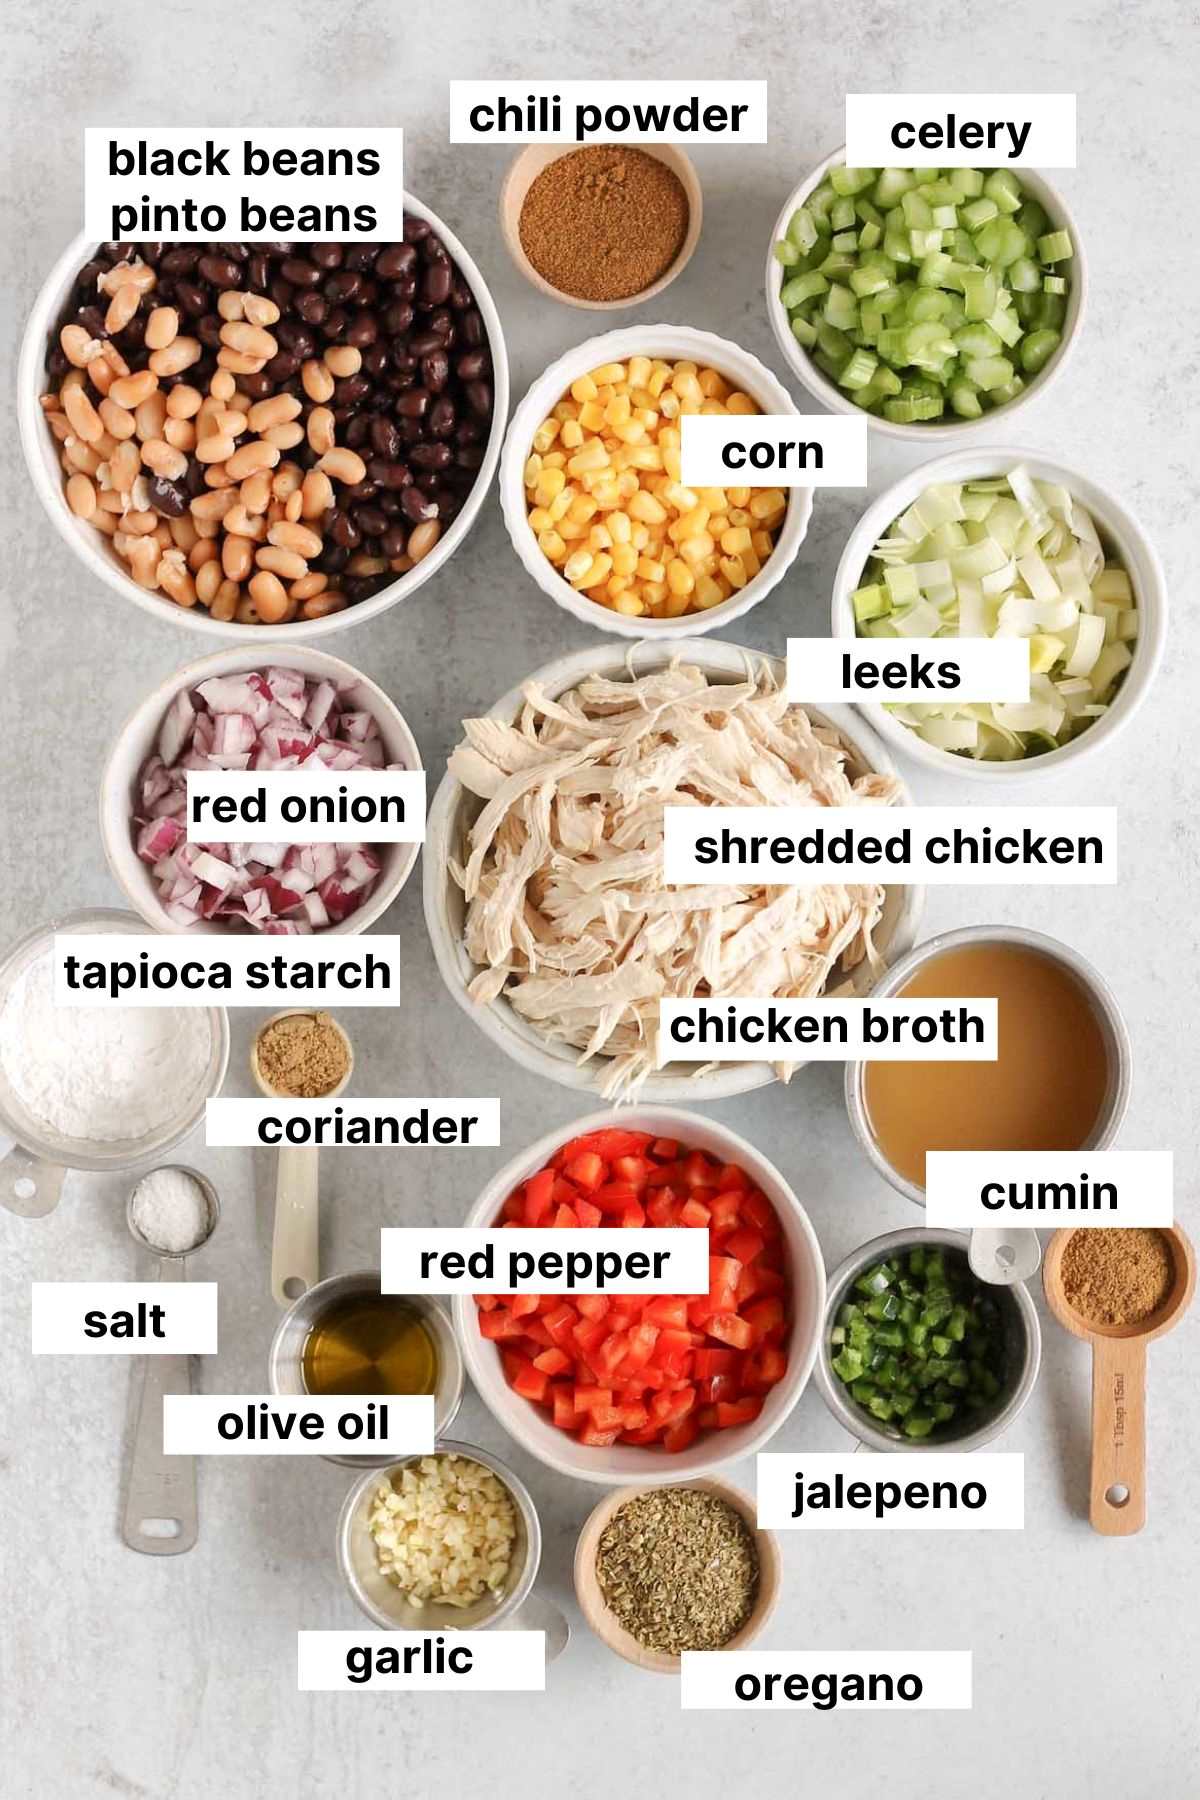 Labeled ingredients for southwest chicken chili.